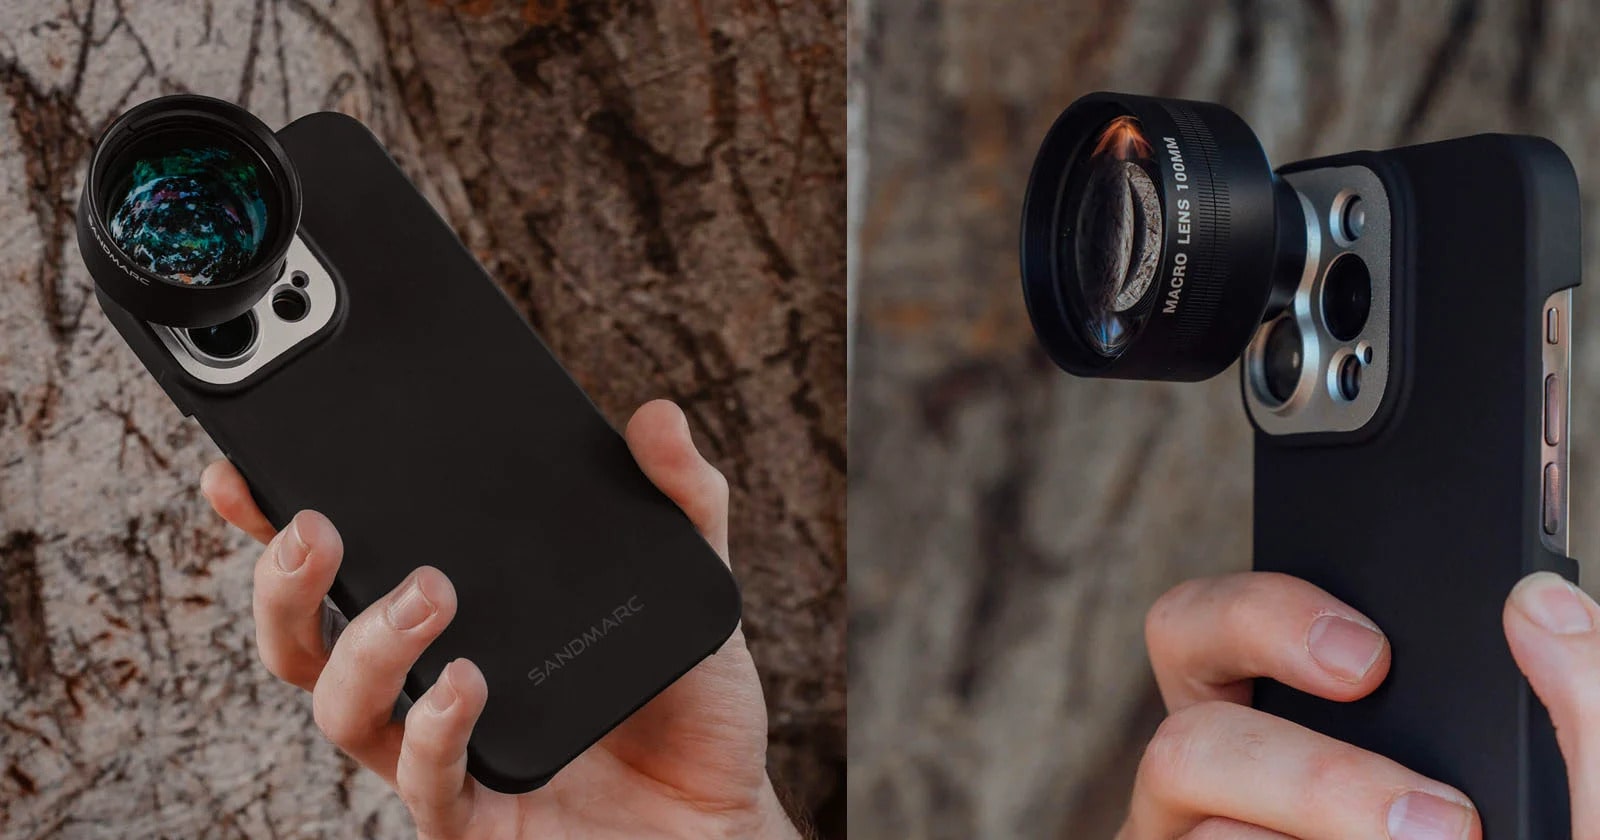 Add a Lens to Your Smartphone